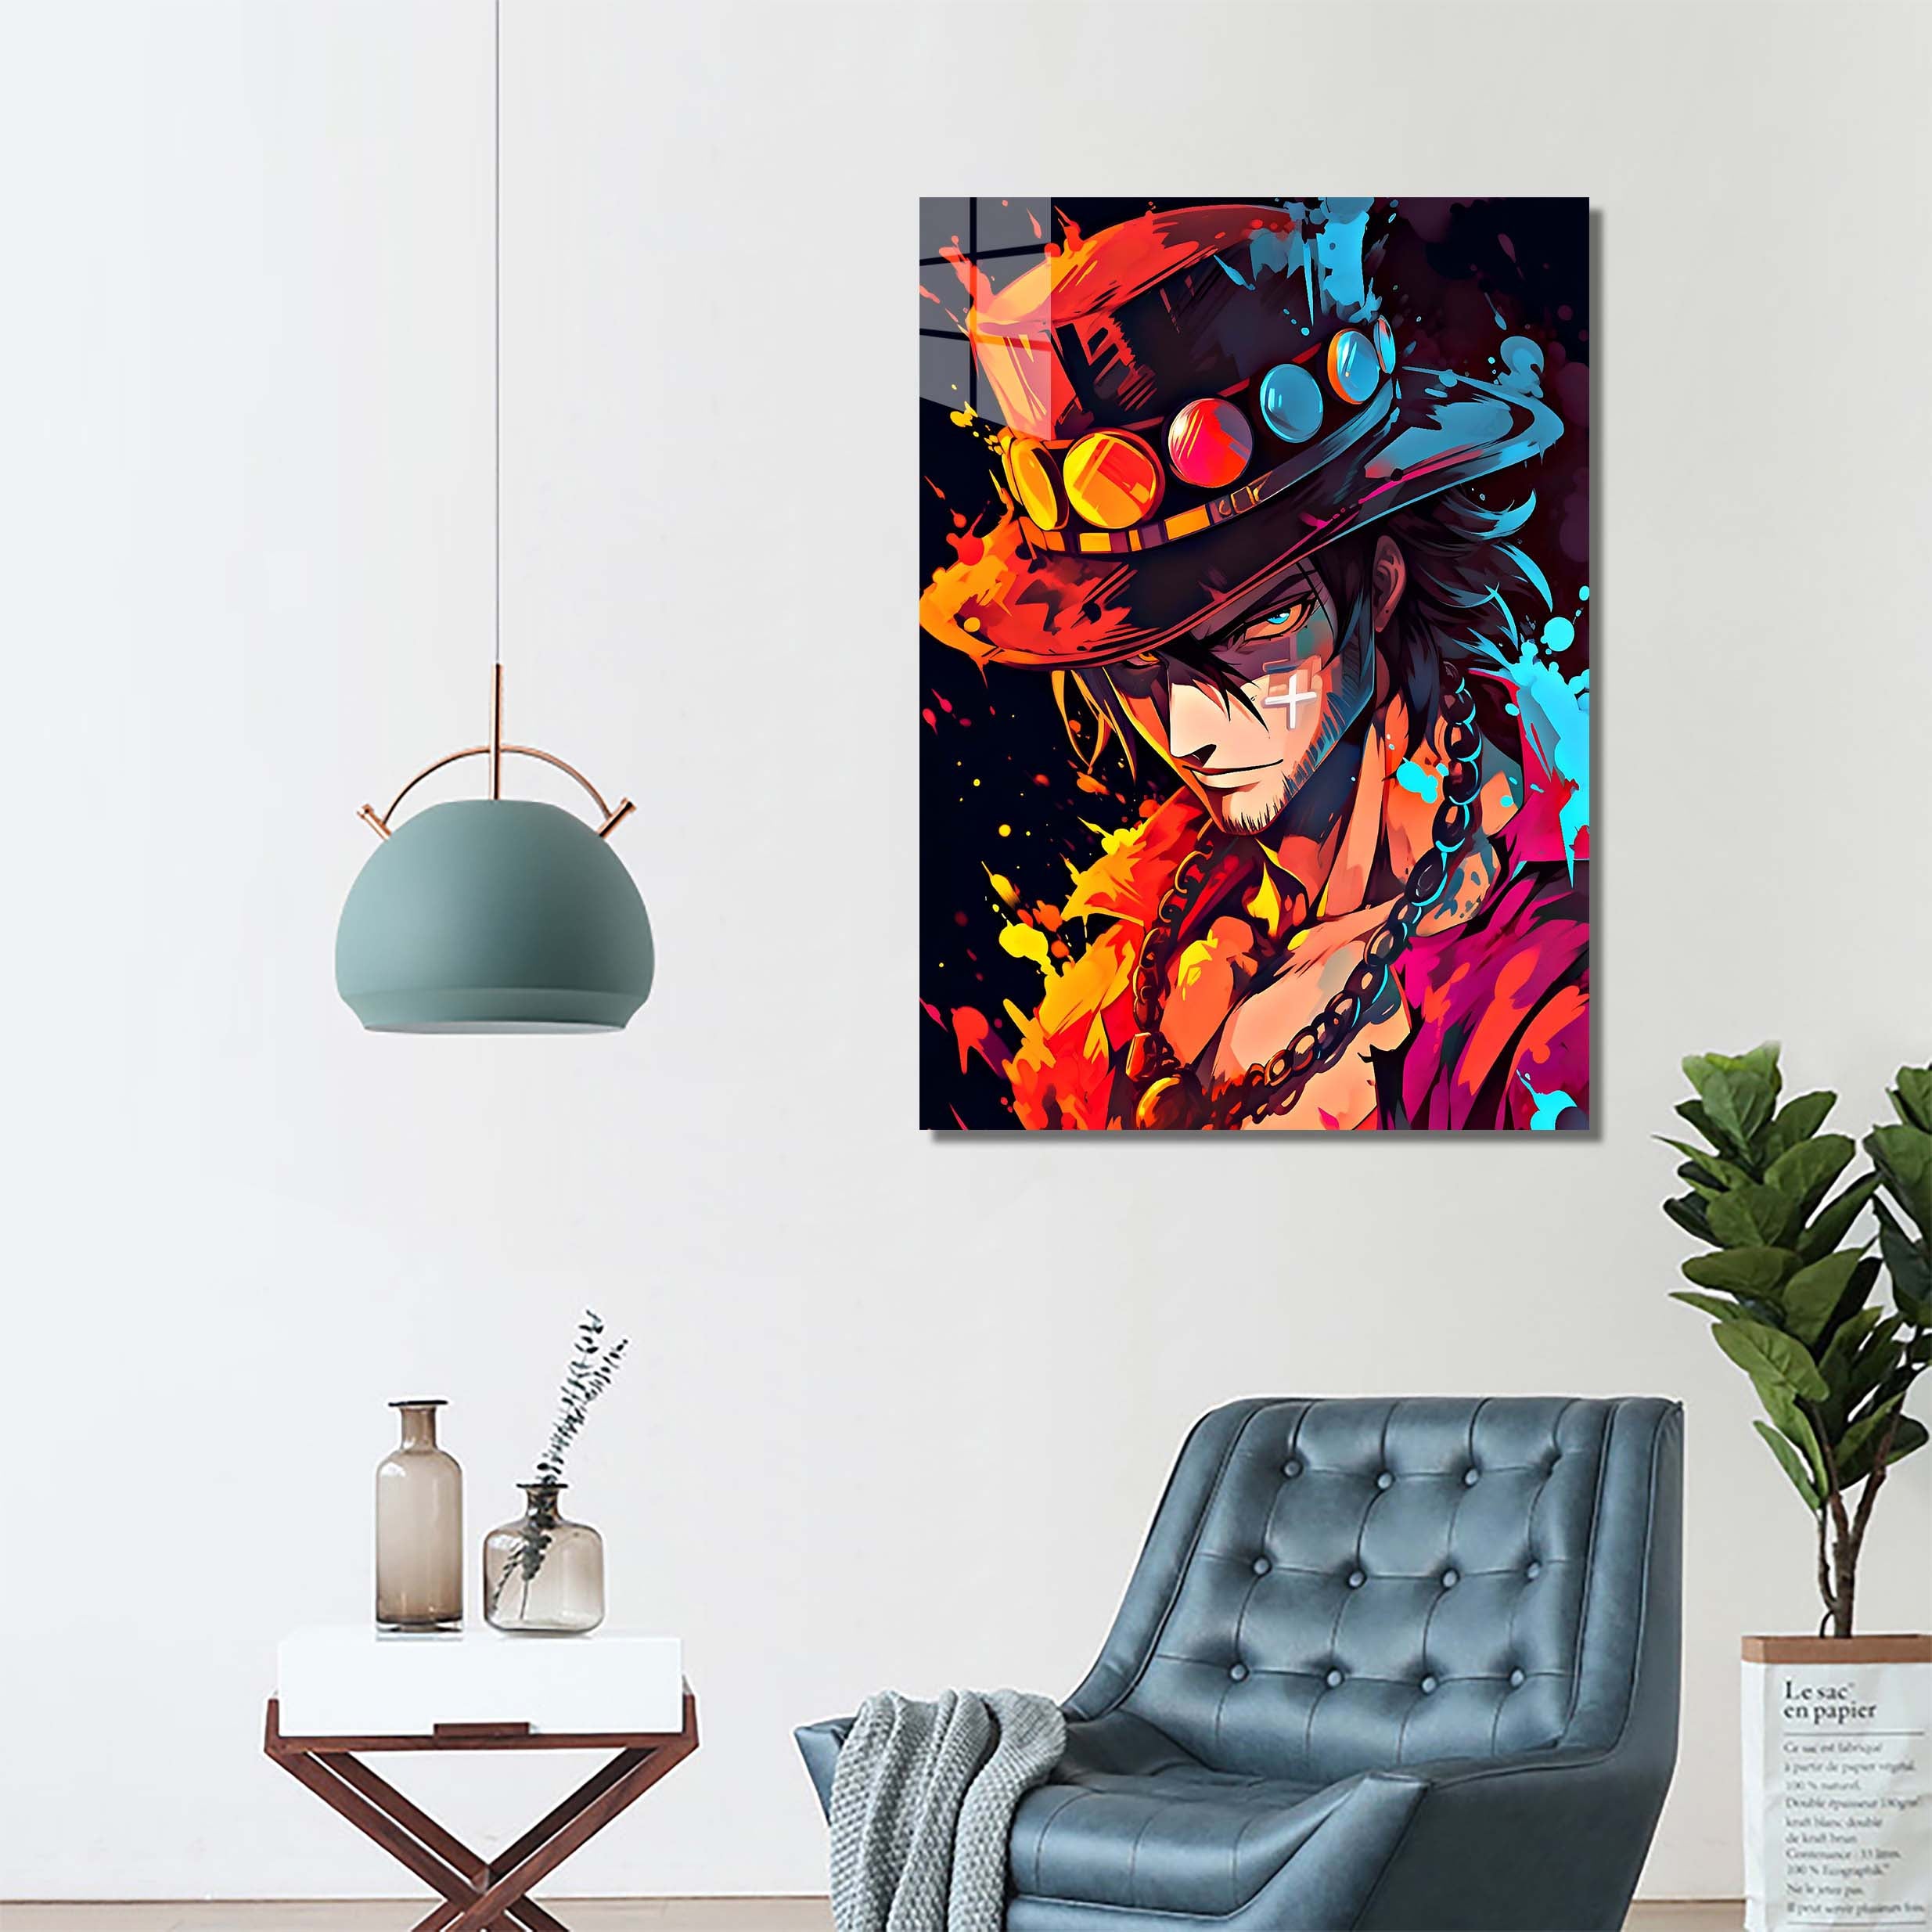 Ace from one piece chromatic art-designed by @Blinkburst